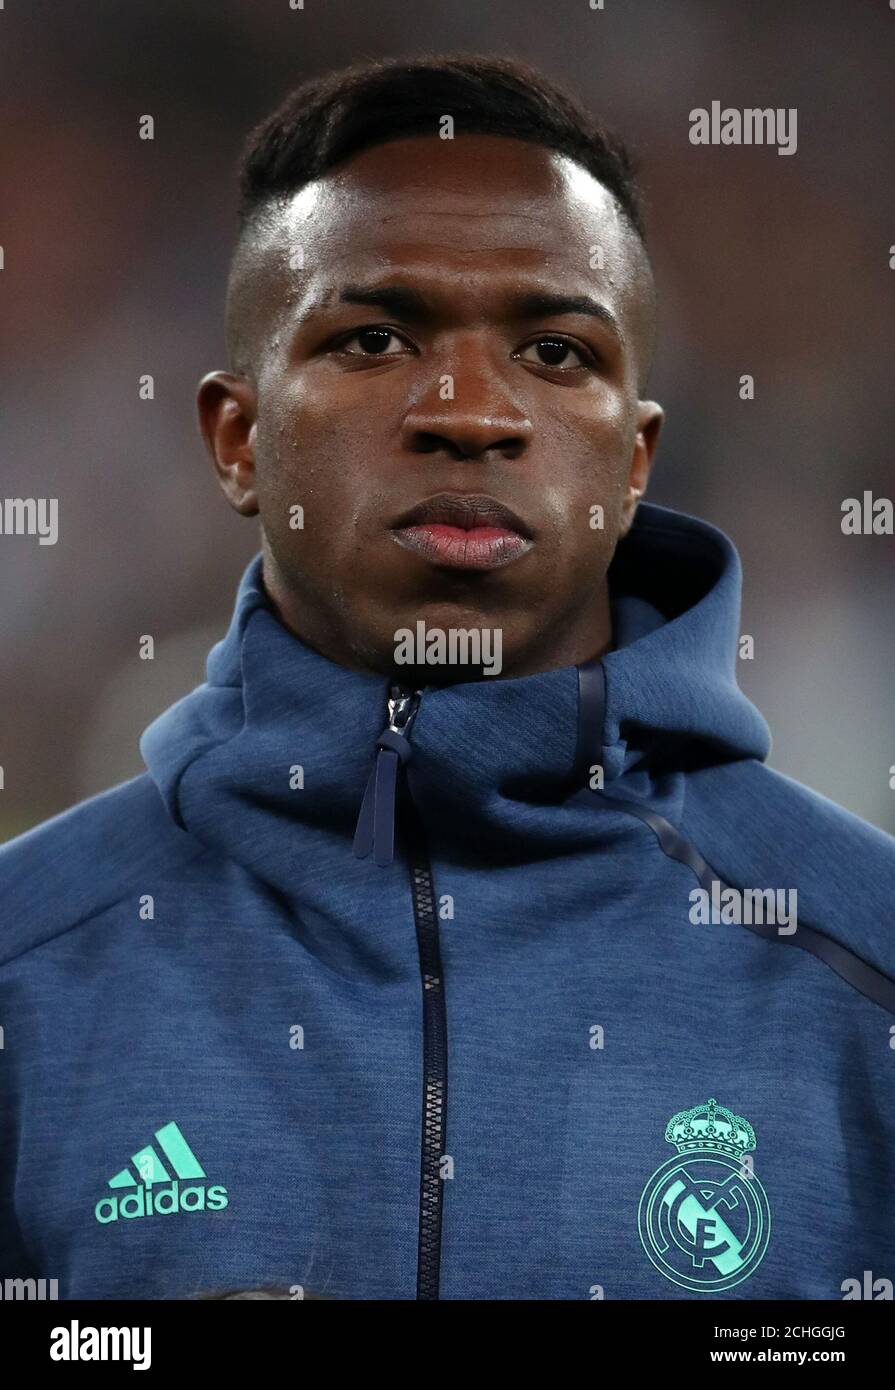 Real Madrid's Vinicius Junior during the UEFA Champions League round of 16 first leg match at the Santiago Bernabeu, Madrid. Stock Photo